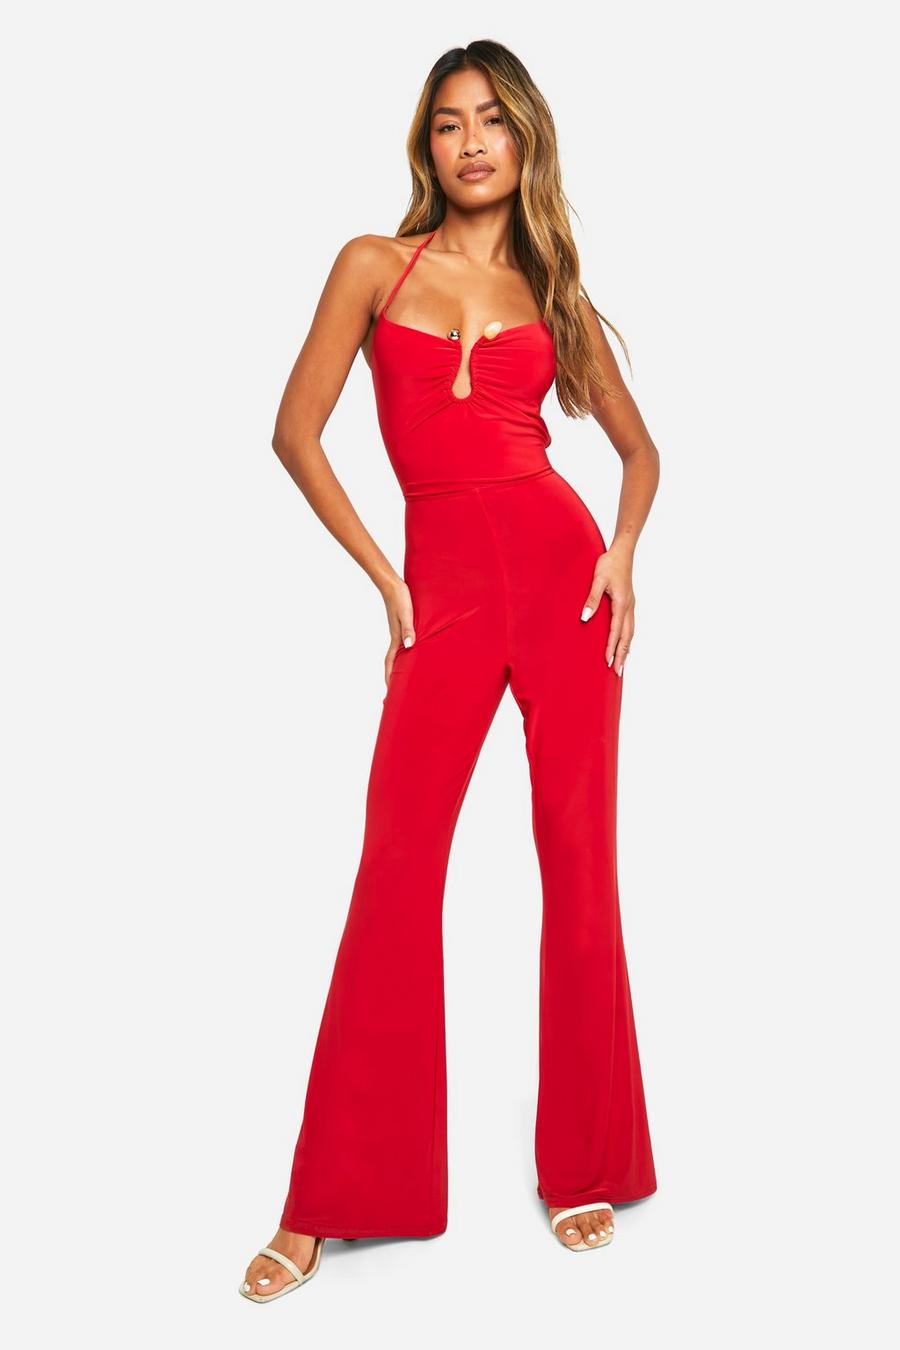 Red Slinky Open Back Ruched Bum Jumpsuit